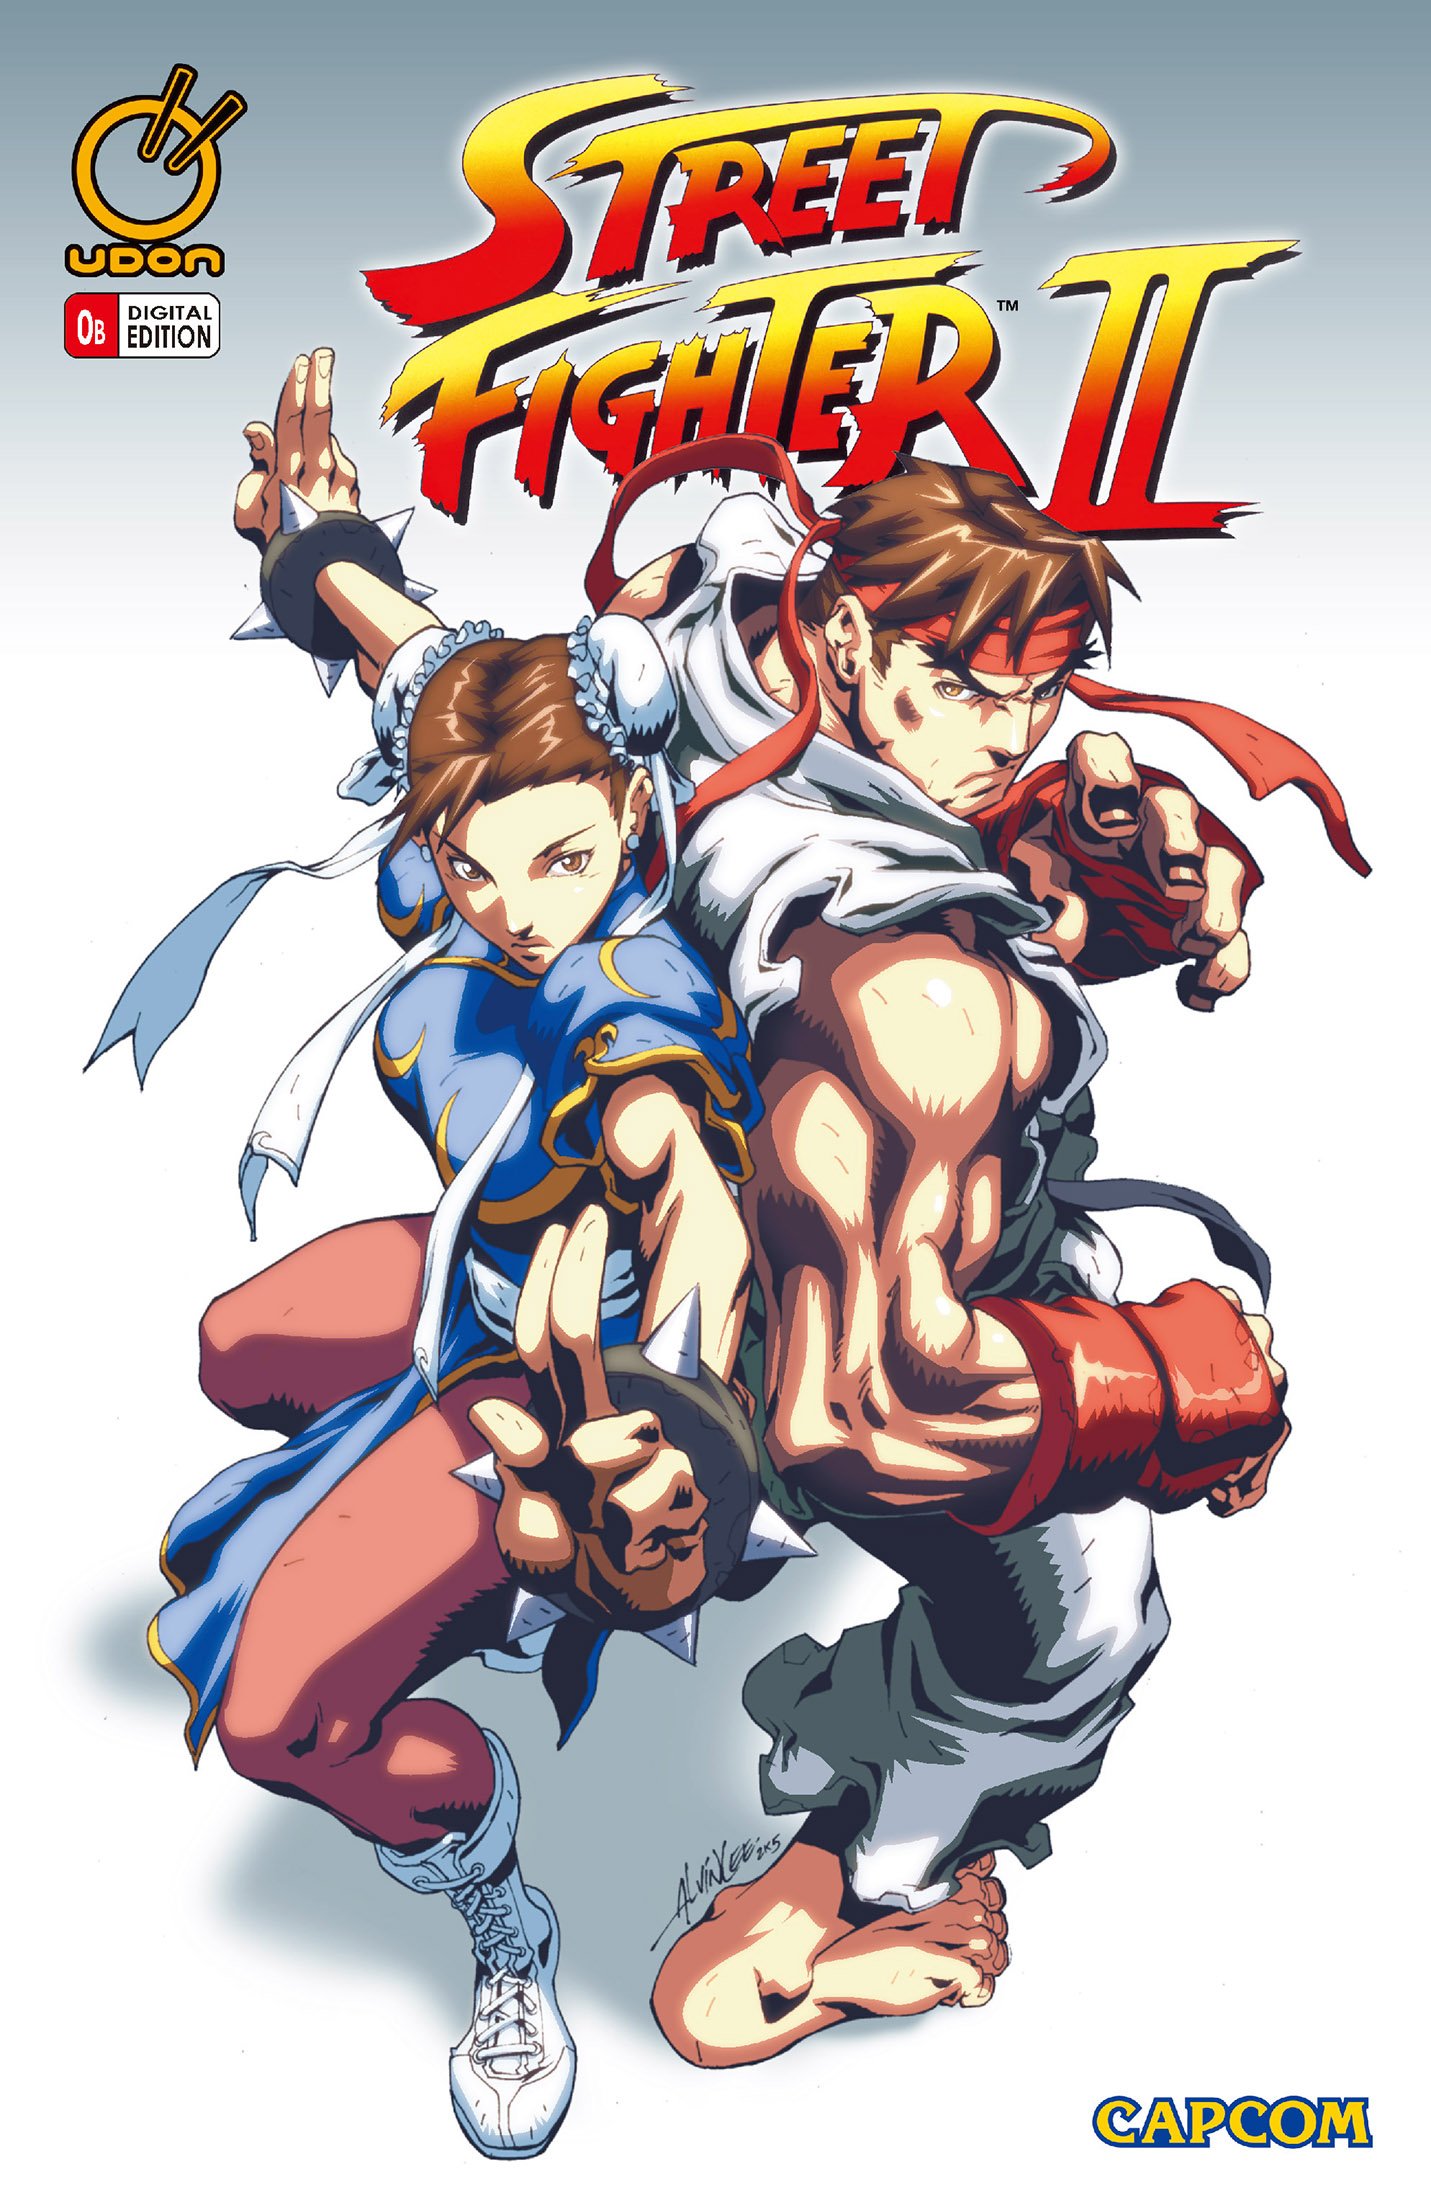 Street Fighter II Issue 0 (October 2005) (cover b)